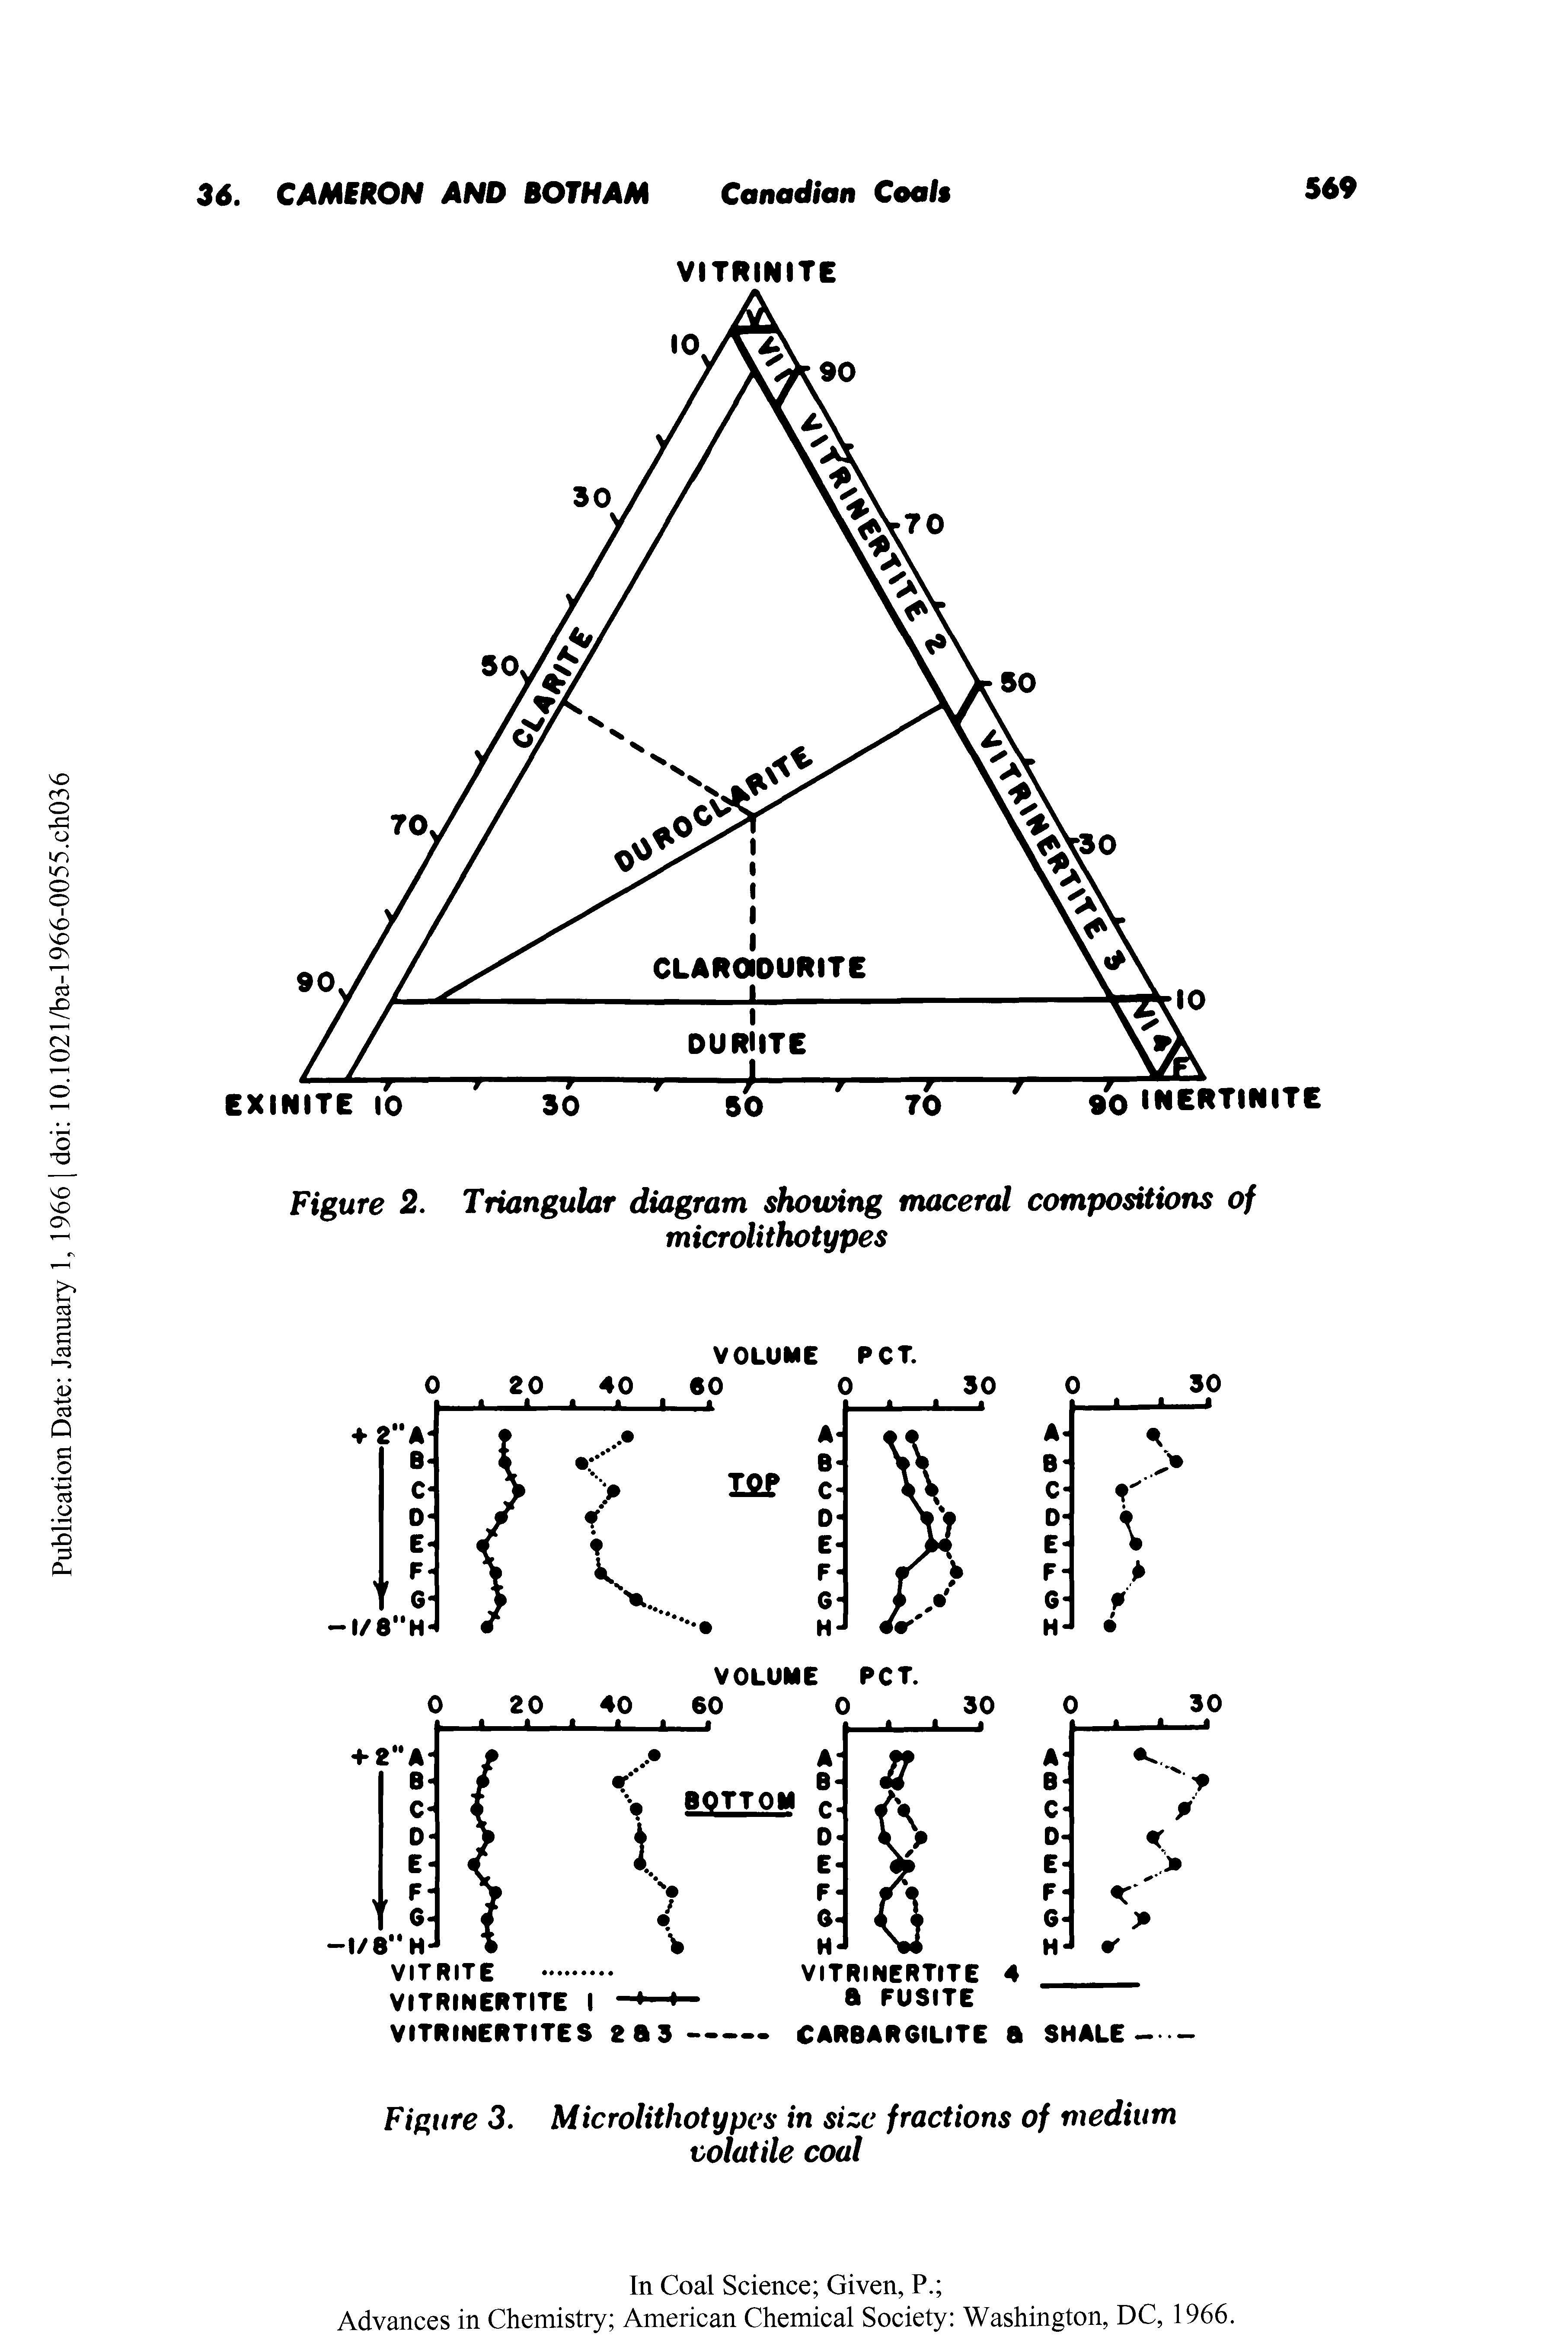 Figure 2. Triangular diagram showing maceral compositions of microlithotypes...